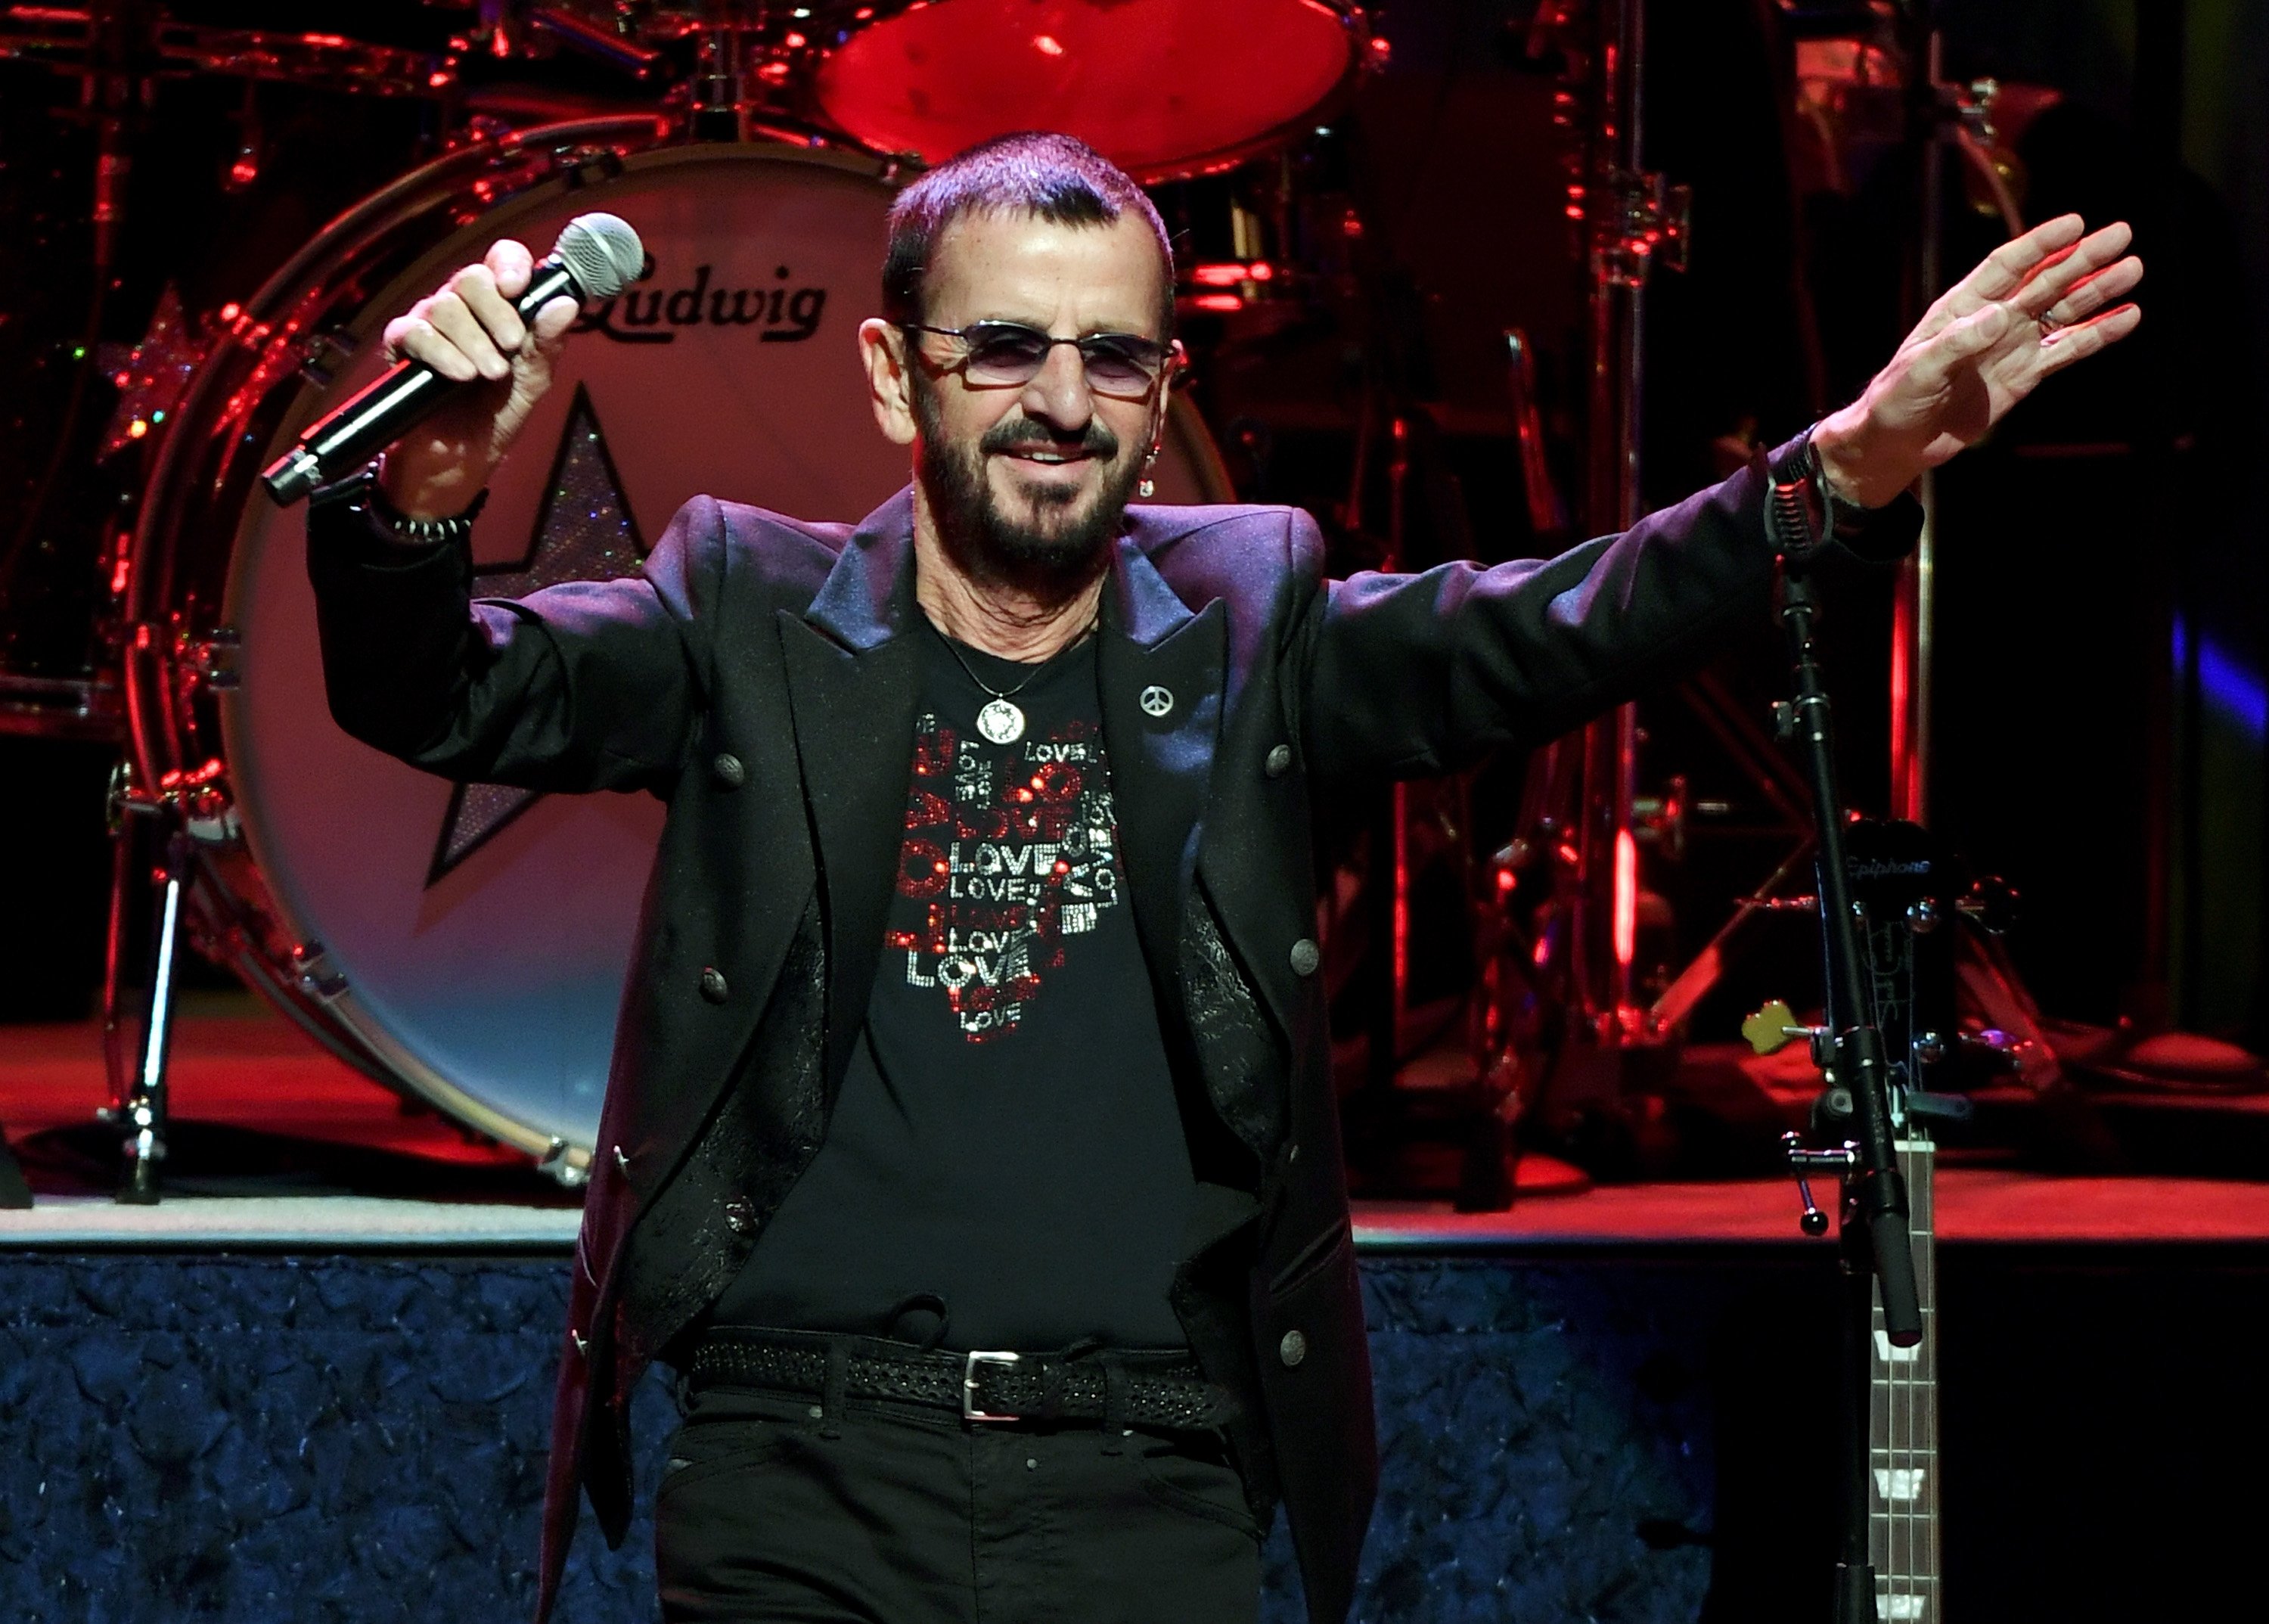 Recording artist Ringo Starr performs with Ringo Starr & His All-Starr Band at The Smith Center for the Performing Arts